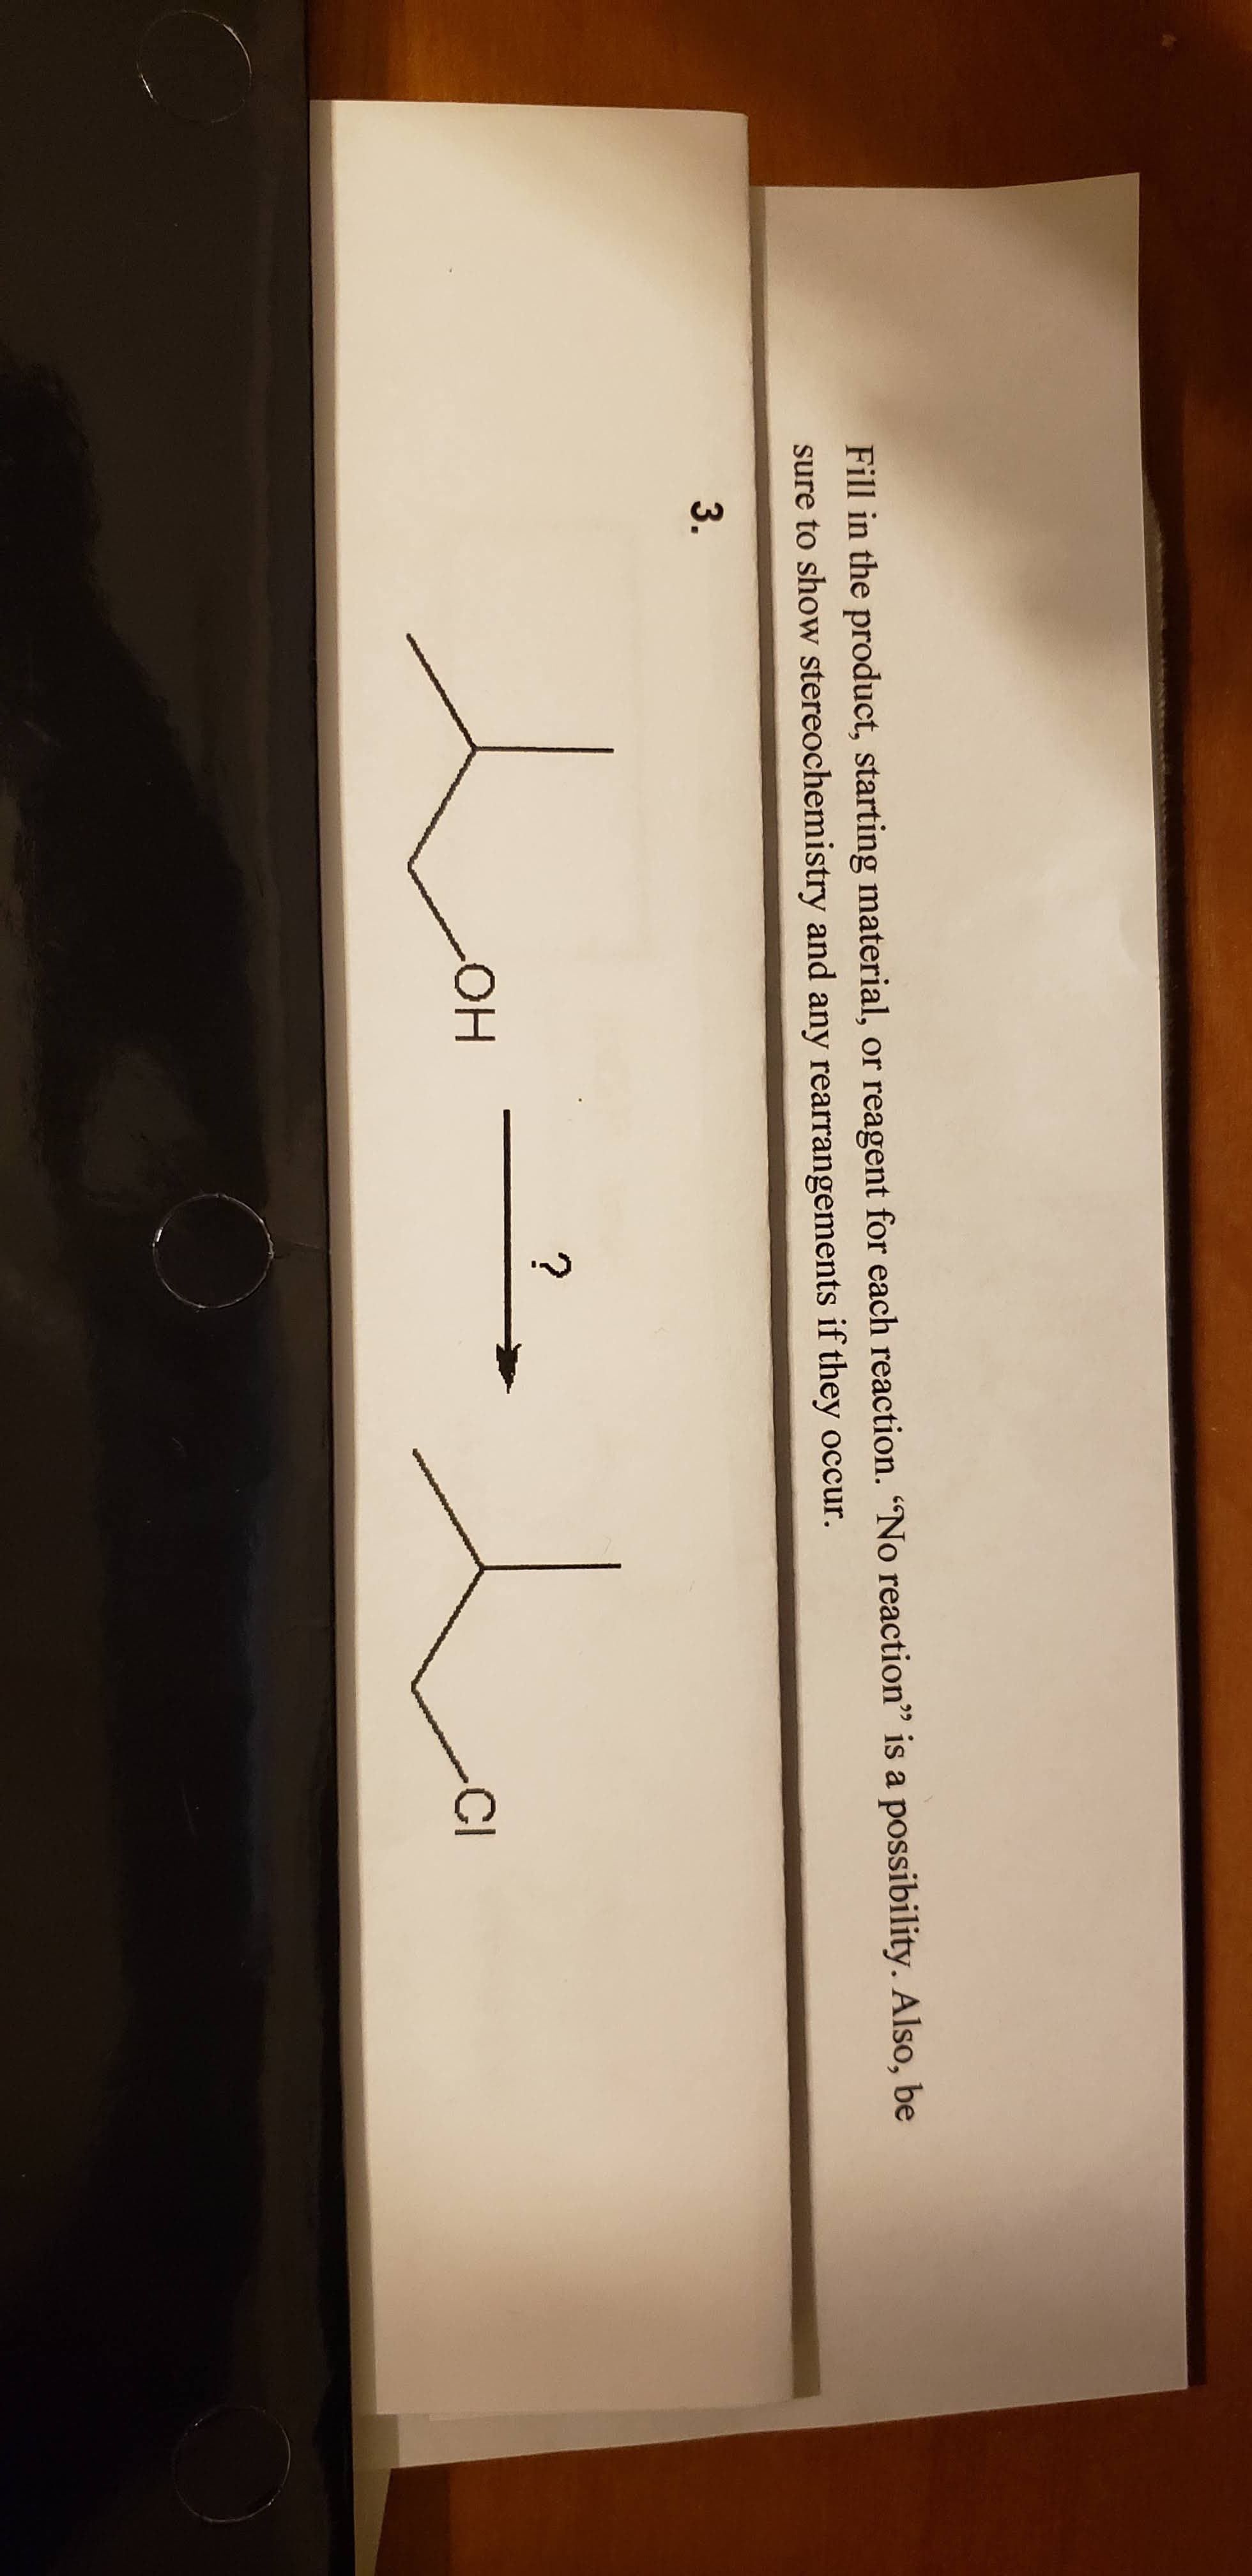 Fill in the product, starting material, or reagent for each reaction. “No reaction" is a possibility. Also, be
sure to show stereochemistry and any rearrangements if they occur.
3.
?
HO-
CI
